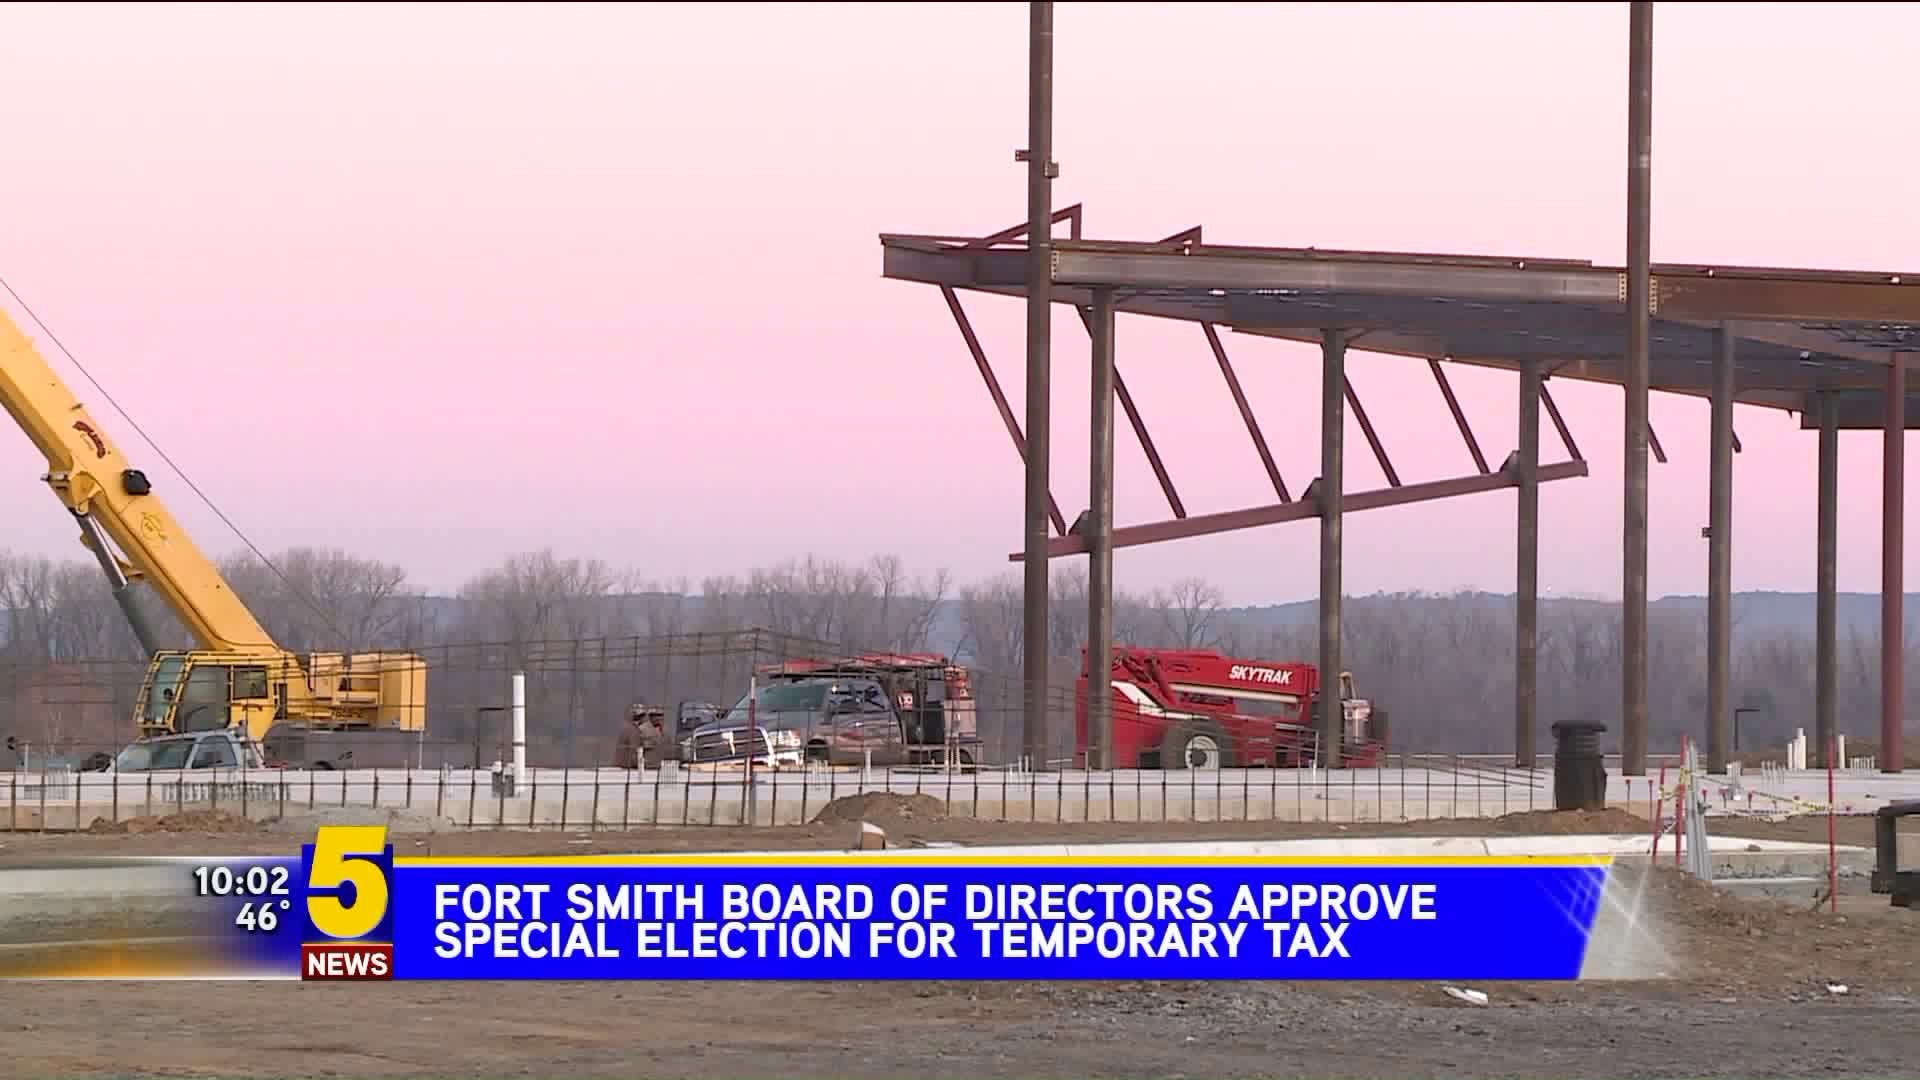 Fort Smith Board of Directors Approve Special Election for Temporary Tax